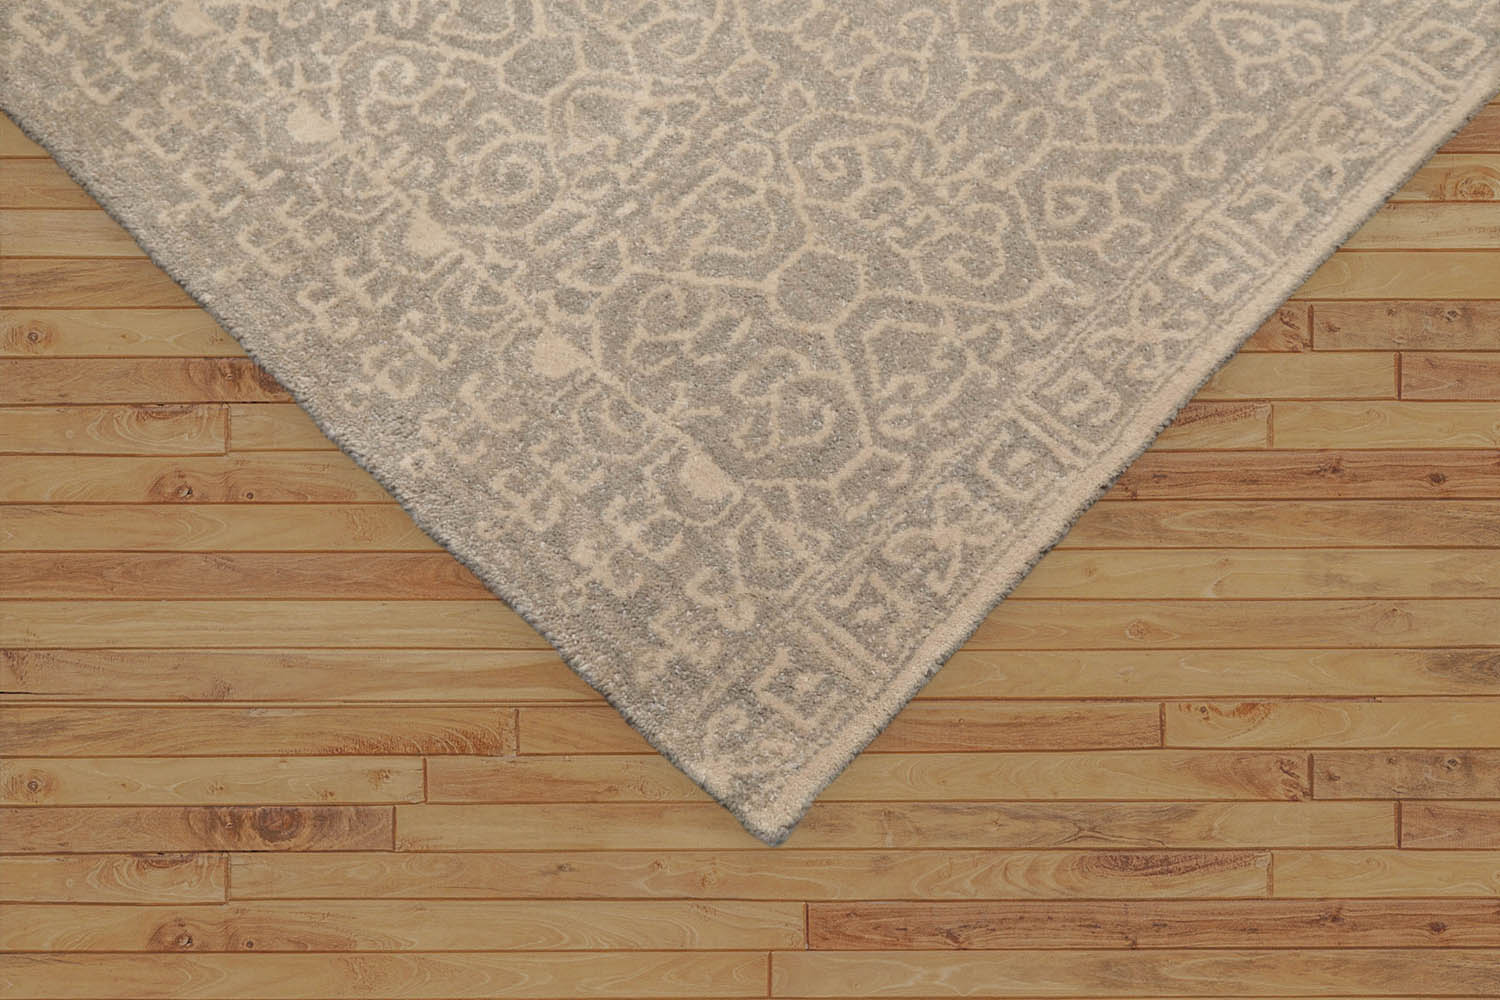 Juvonte 5x8 Hand Tufted Hand Made 100% Wool Patterned Traditional Oriental Area Rug Gray, Beige Color